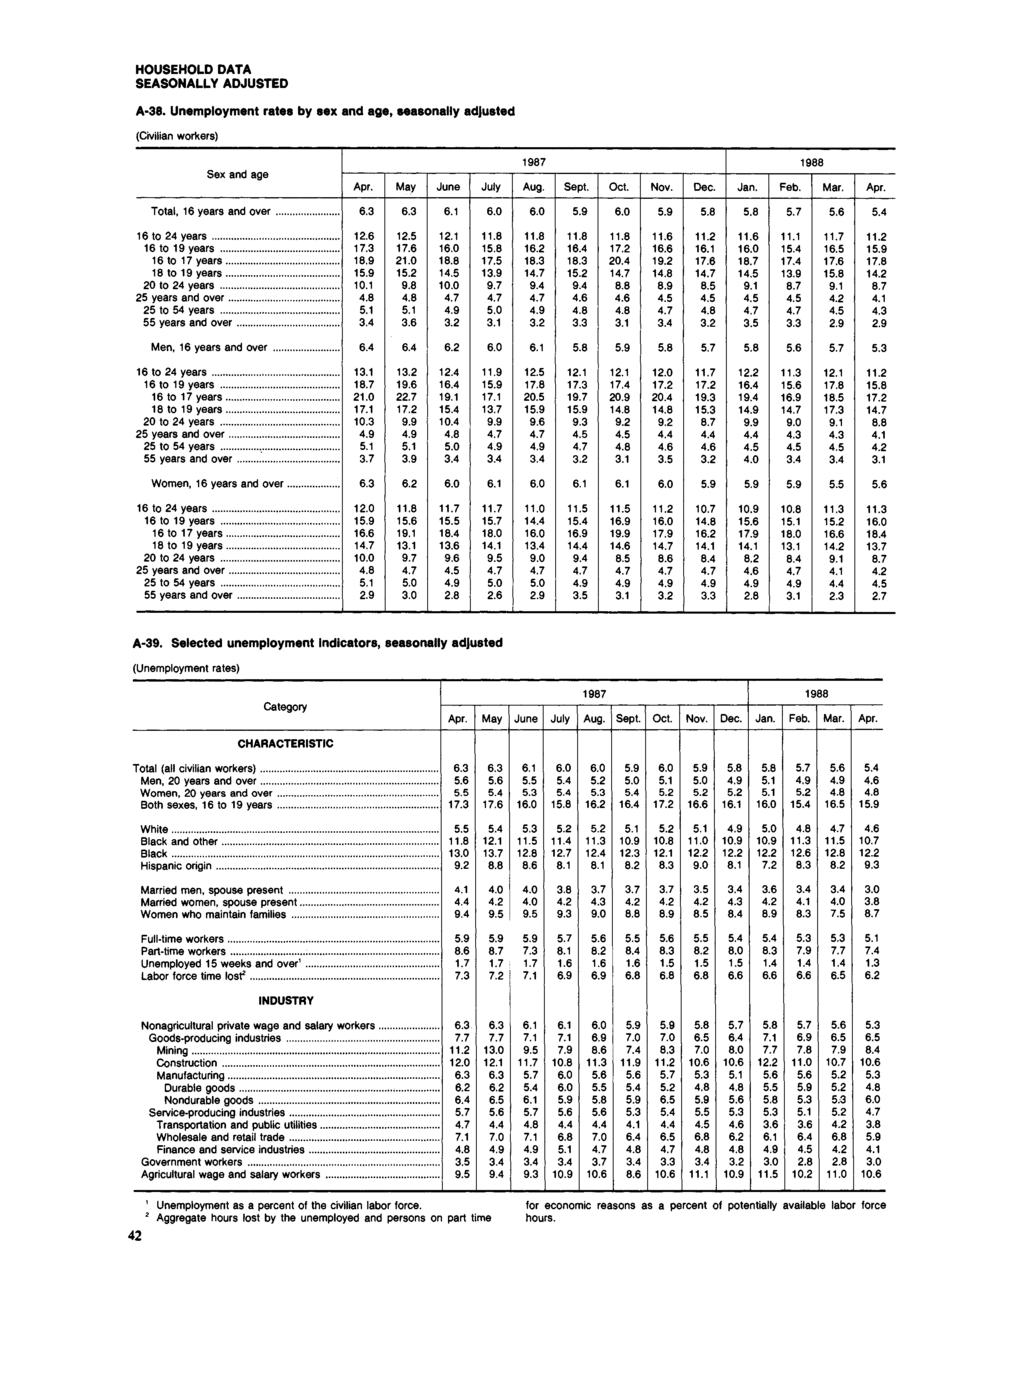 HOUSEHOLD DATA SEASONALLY ADJUSTED A38. Unemployment rates by sex and age, seasonally adjusted (Civilian workers) Sex and age Total, 16 years and over... May June July Aug. Sept. Oct. Nov. Dec. 6 Jan.